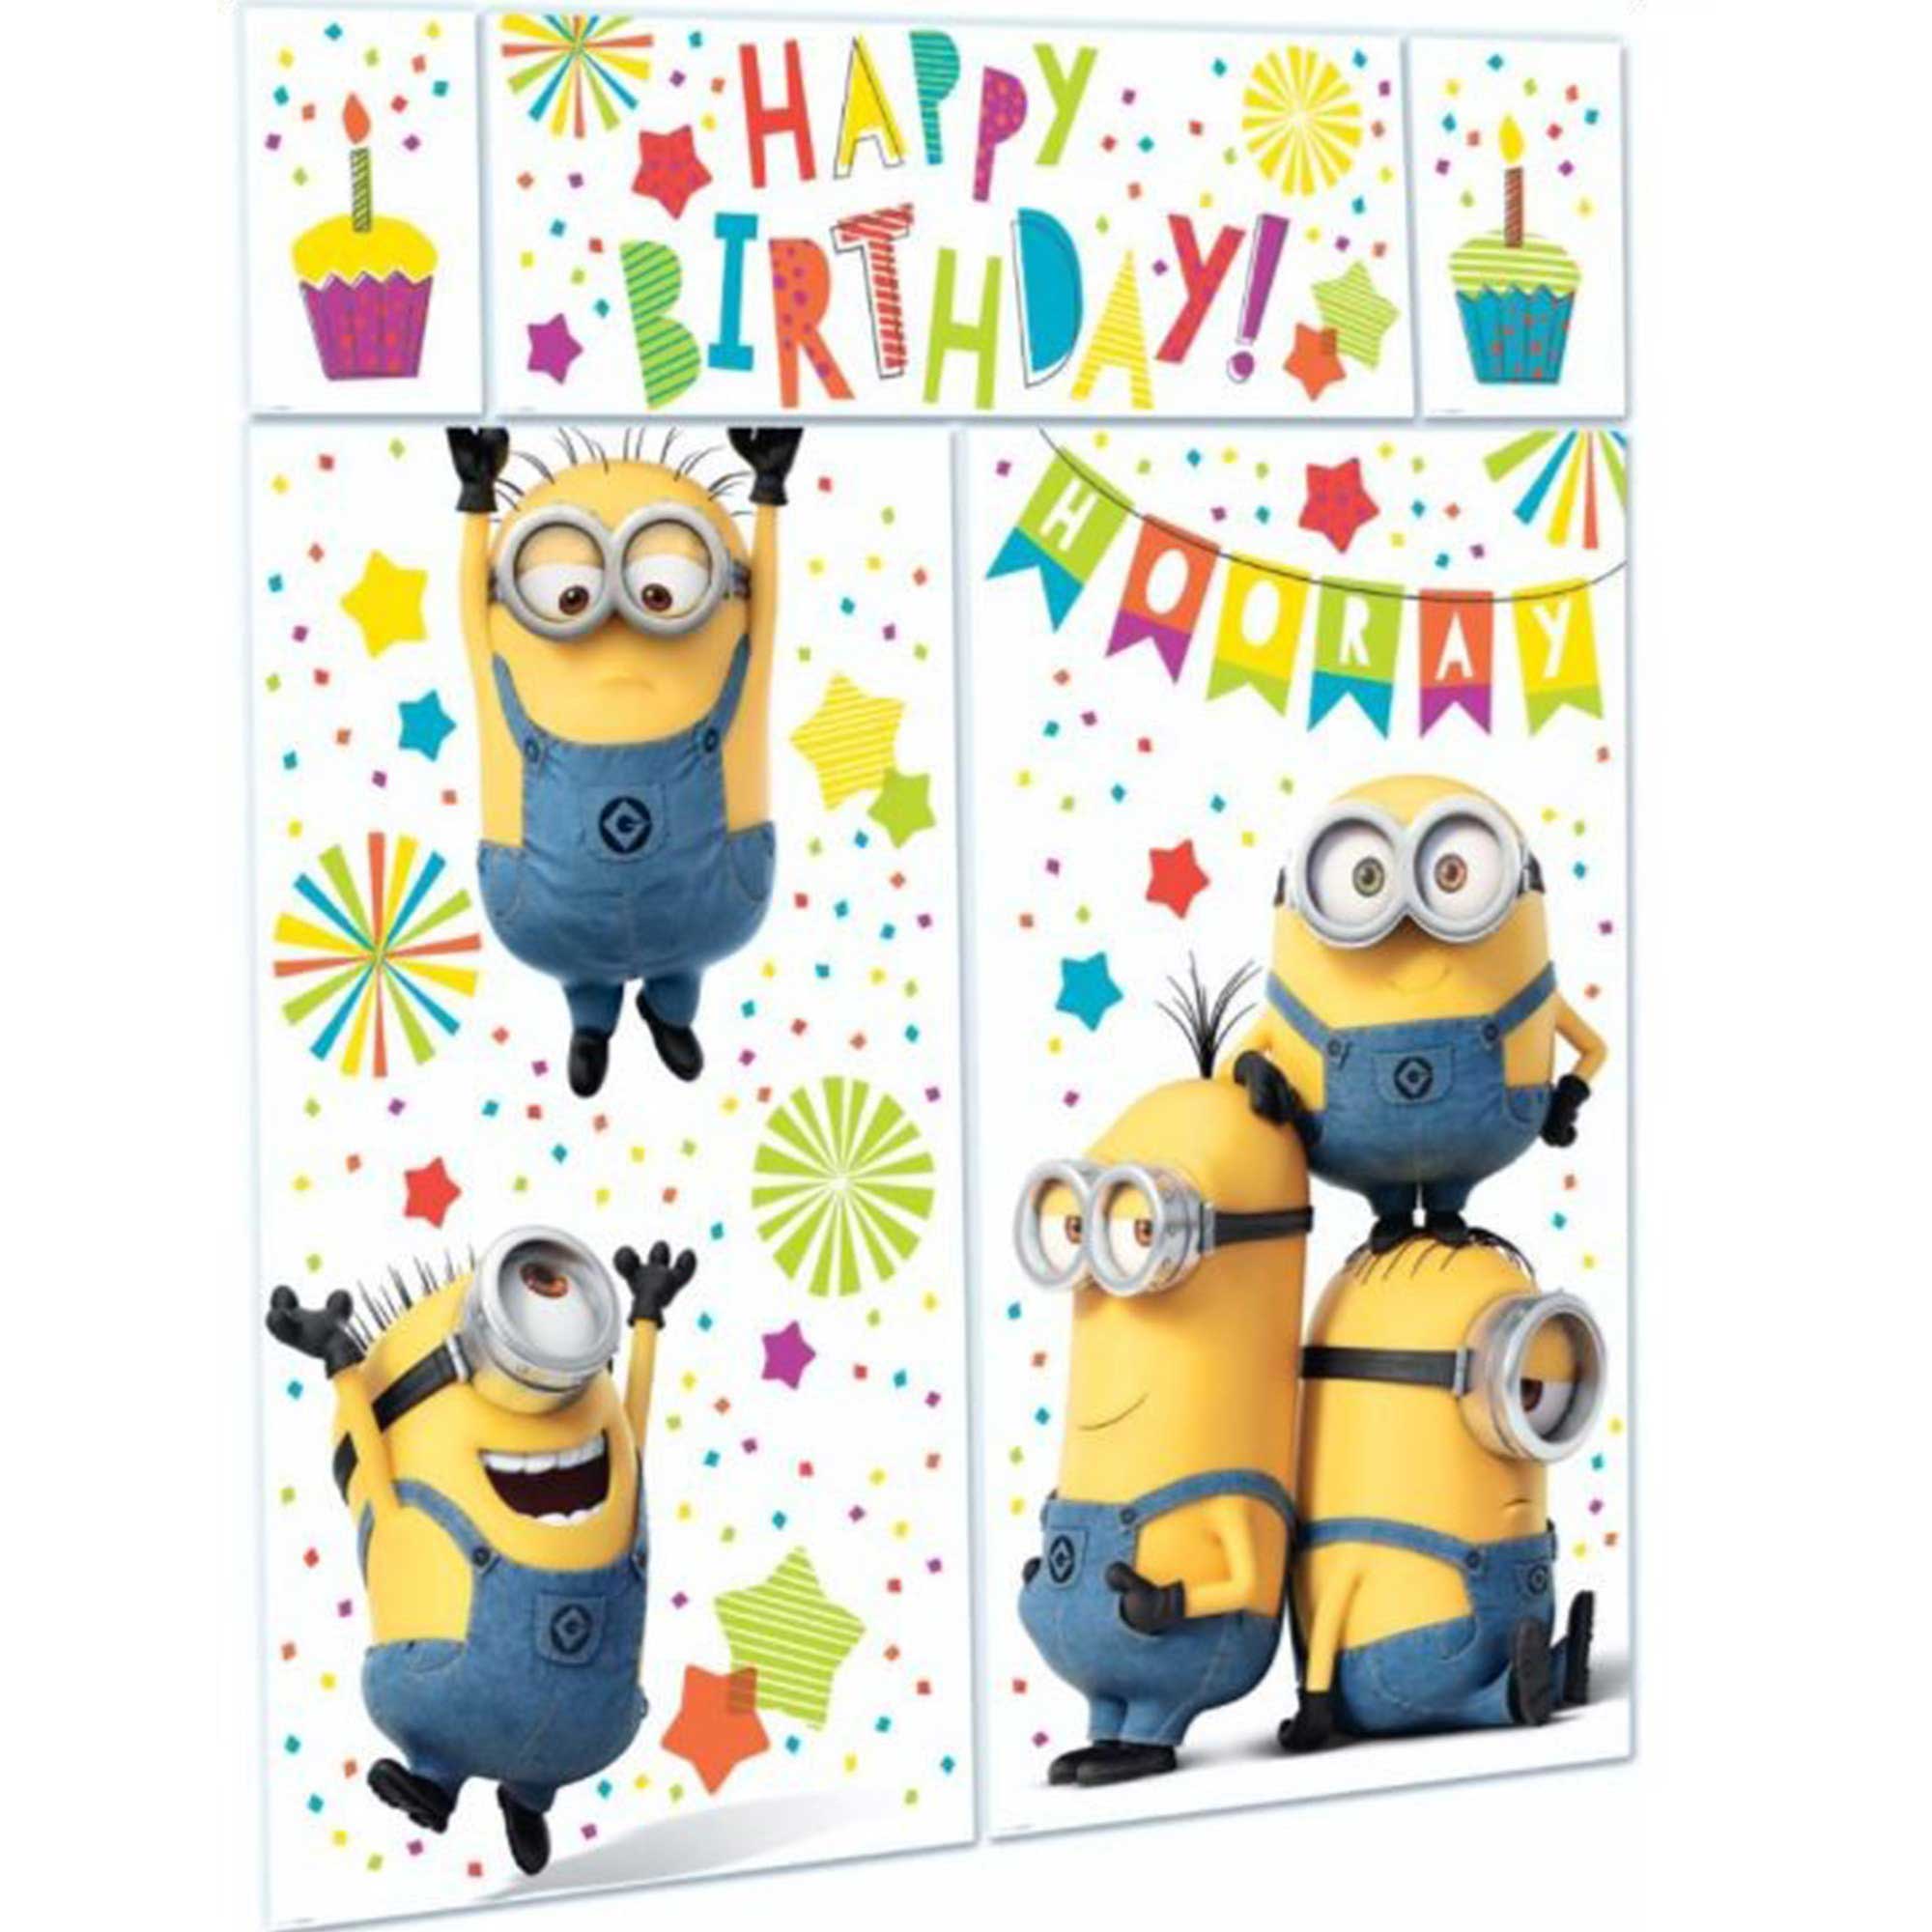 Party Empress' Minions - Despicable Me Collection is designed to infuse any event with the humor and energy of the Minions, making it perfect for birthdays and themed parties that delight fans of all ages.